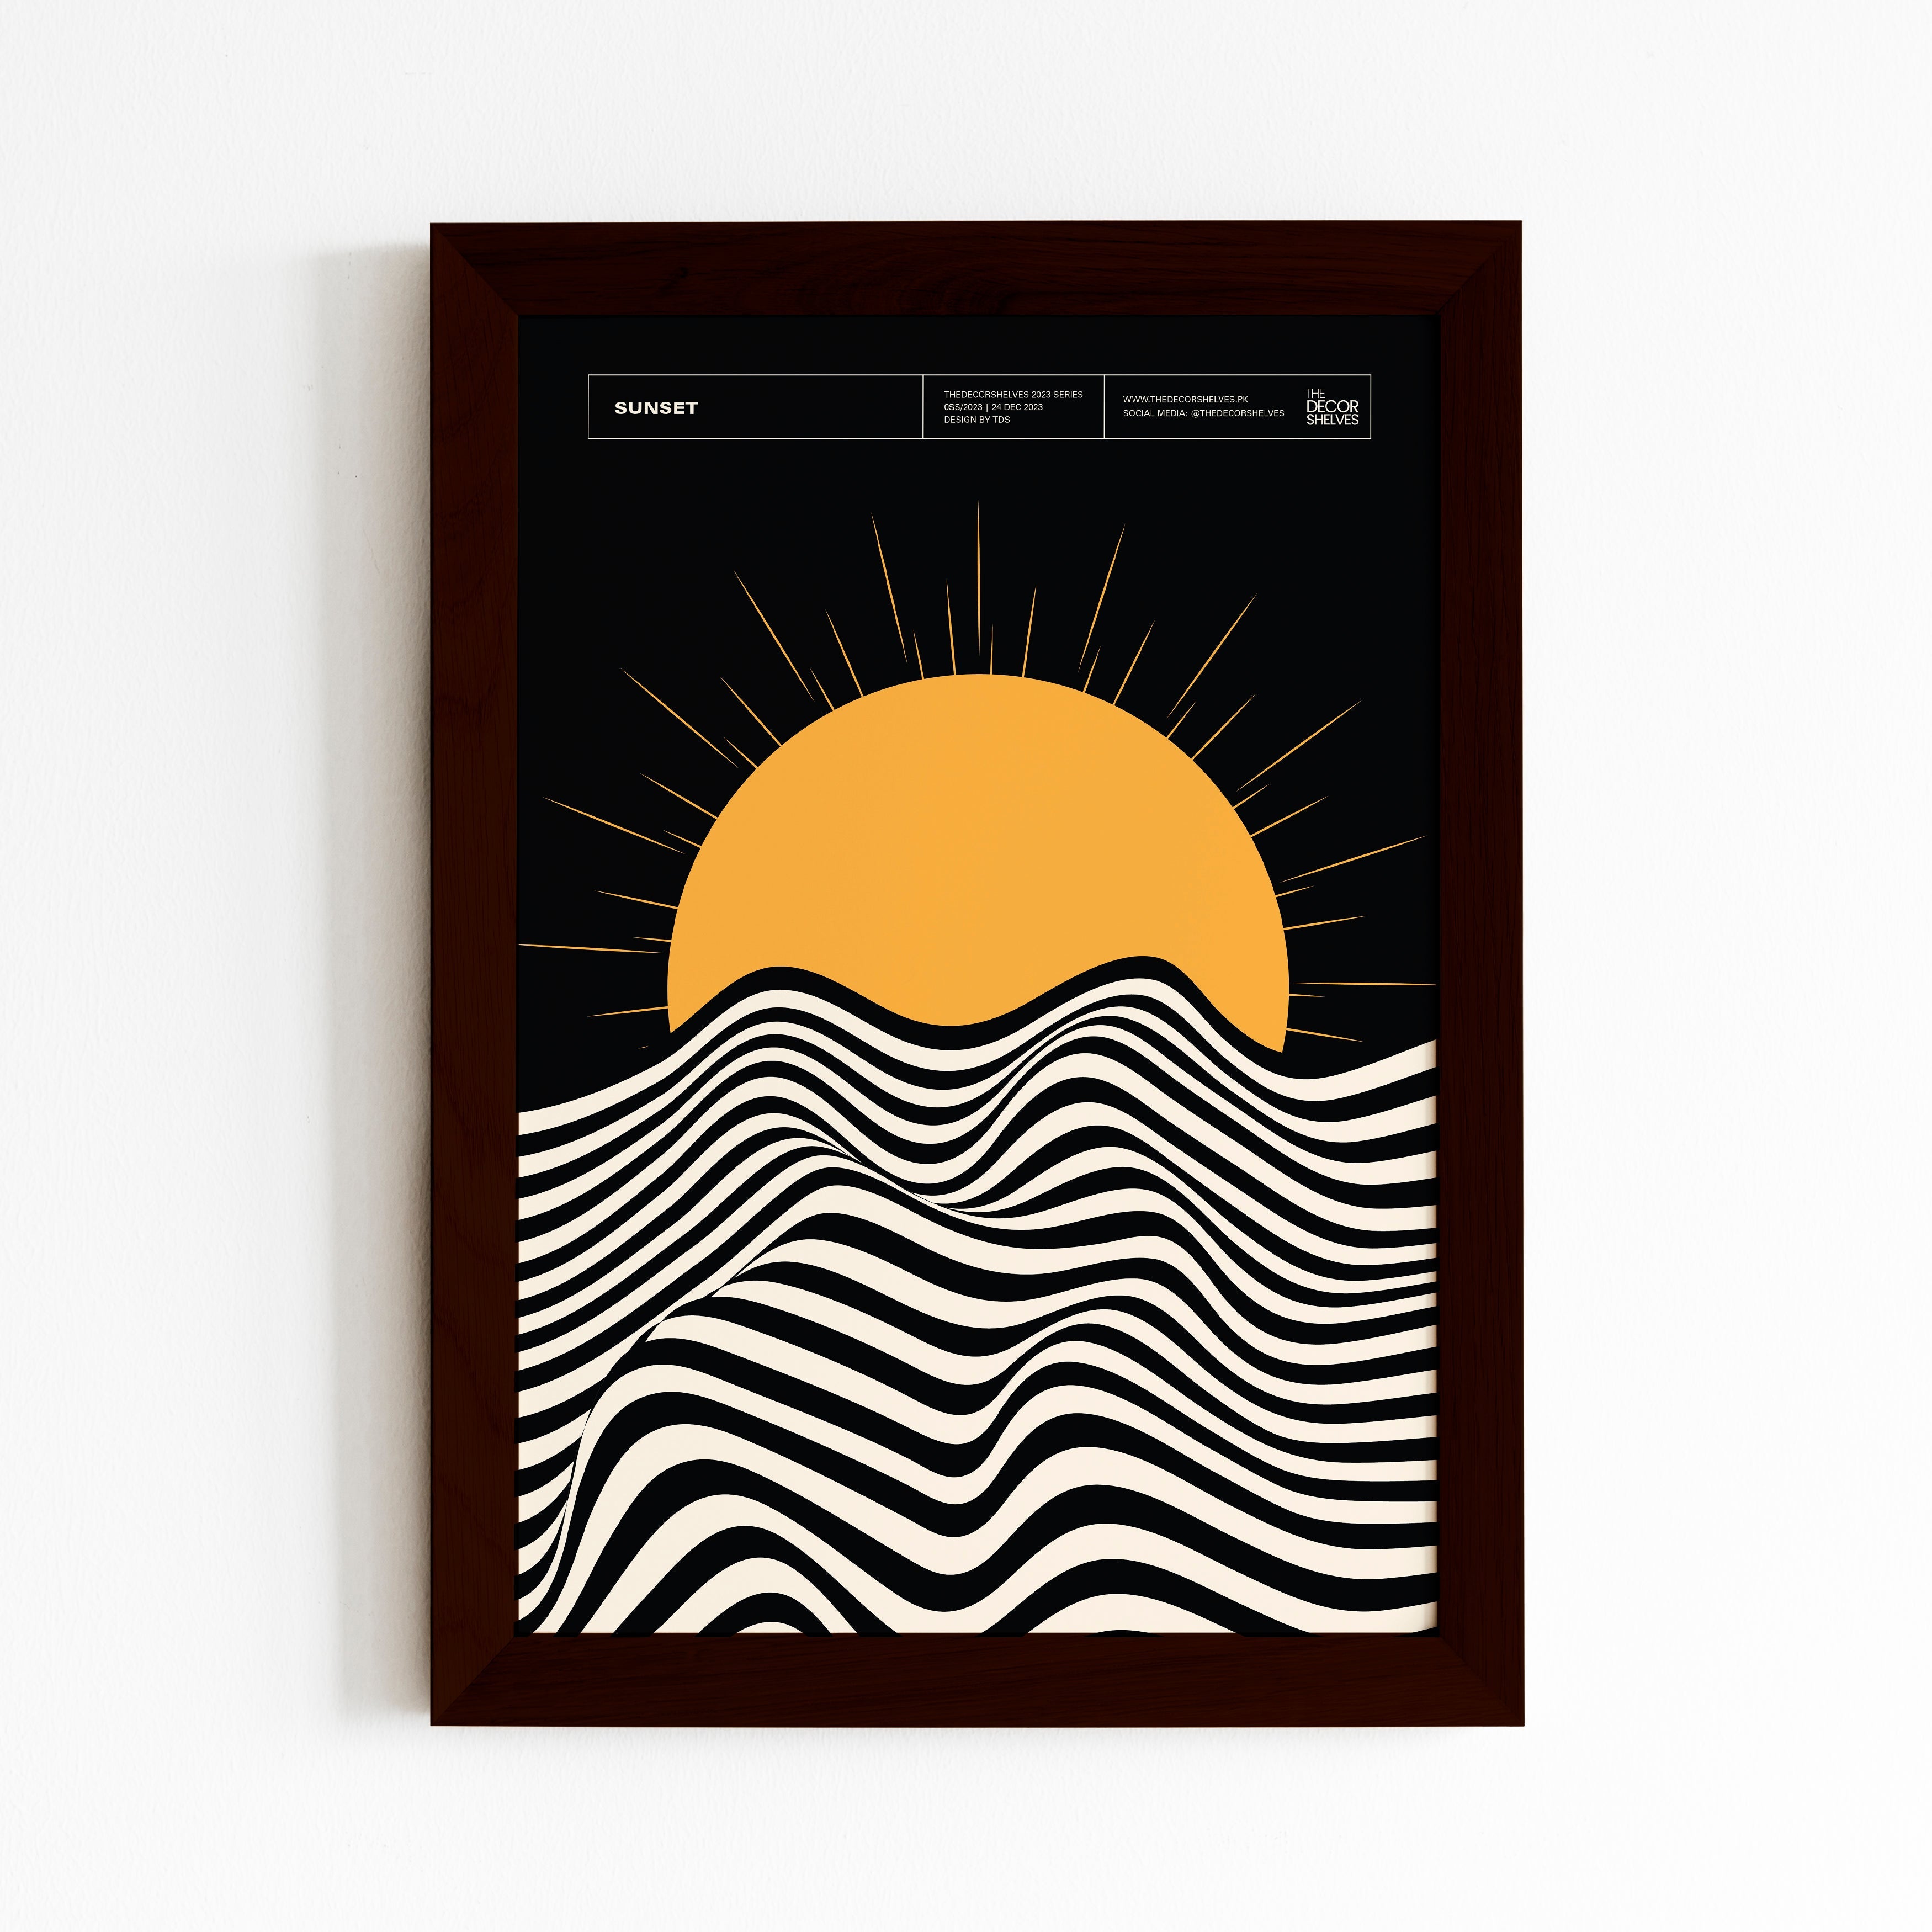 sunset, wall frames, poster design, black frame, wall art, abstract art, frames, the decor shelves, home decor, room decor, decor ideas, black and white, geometrical, brown frame, 2024 poster, circles, Colour full poster, trending posters, digital art, shapes, multi colours, multi colors, minimal art, 90s, 90's,  circles in row, color circles, sun, waves, river